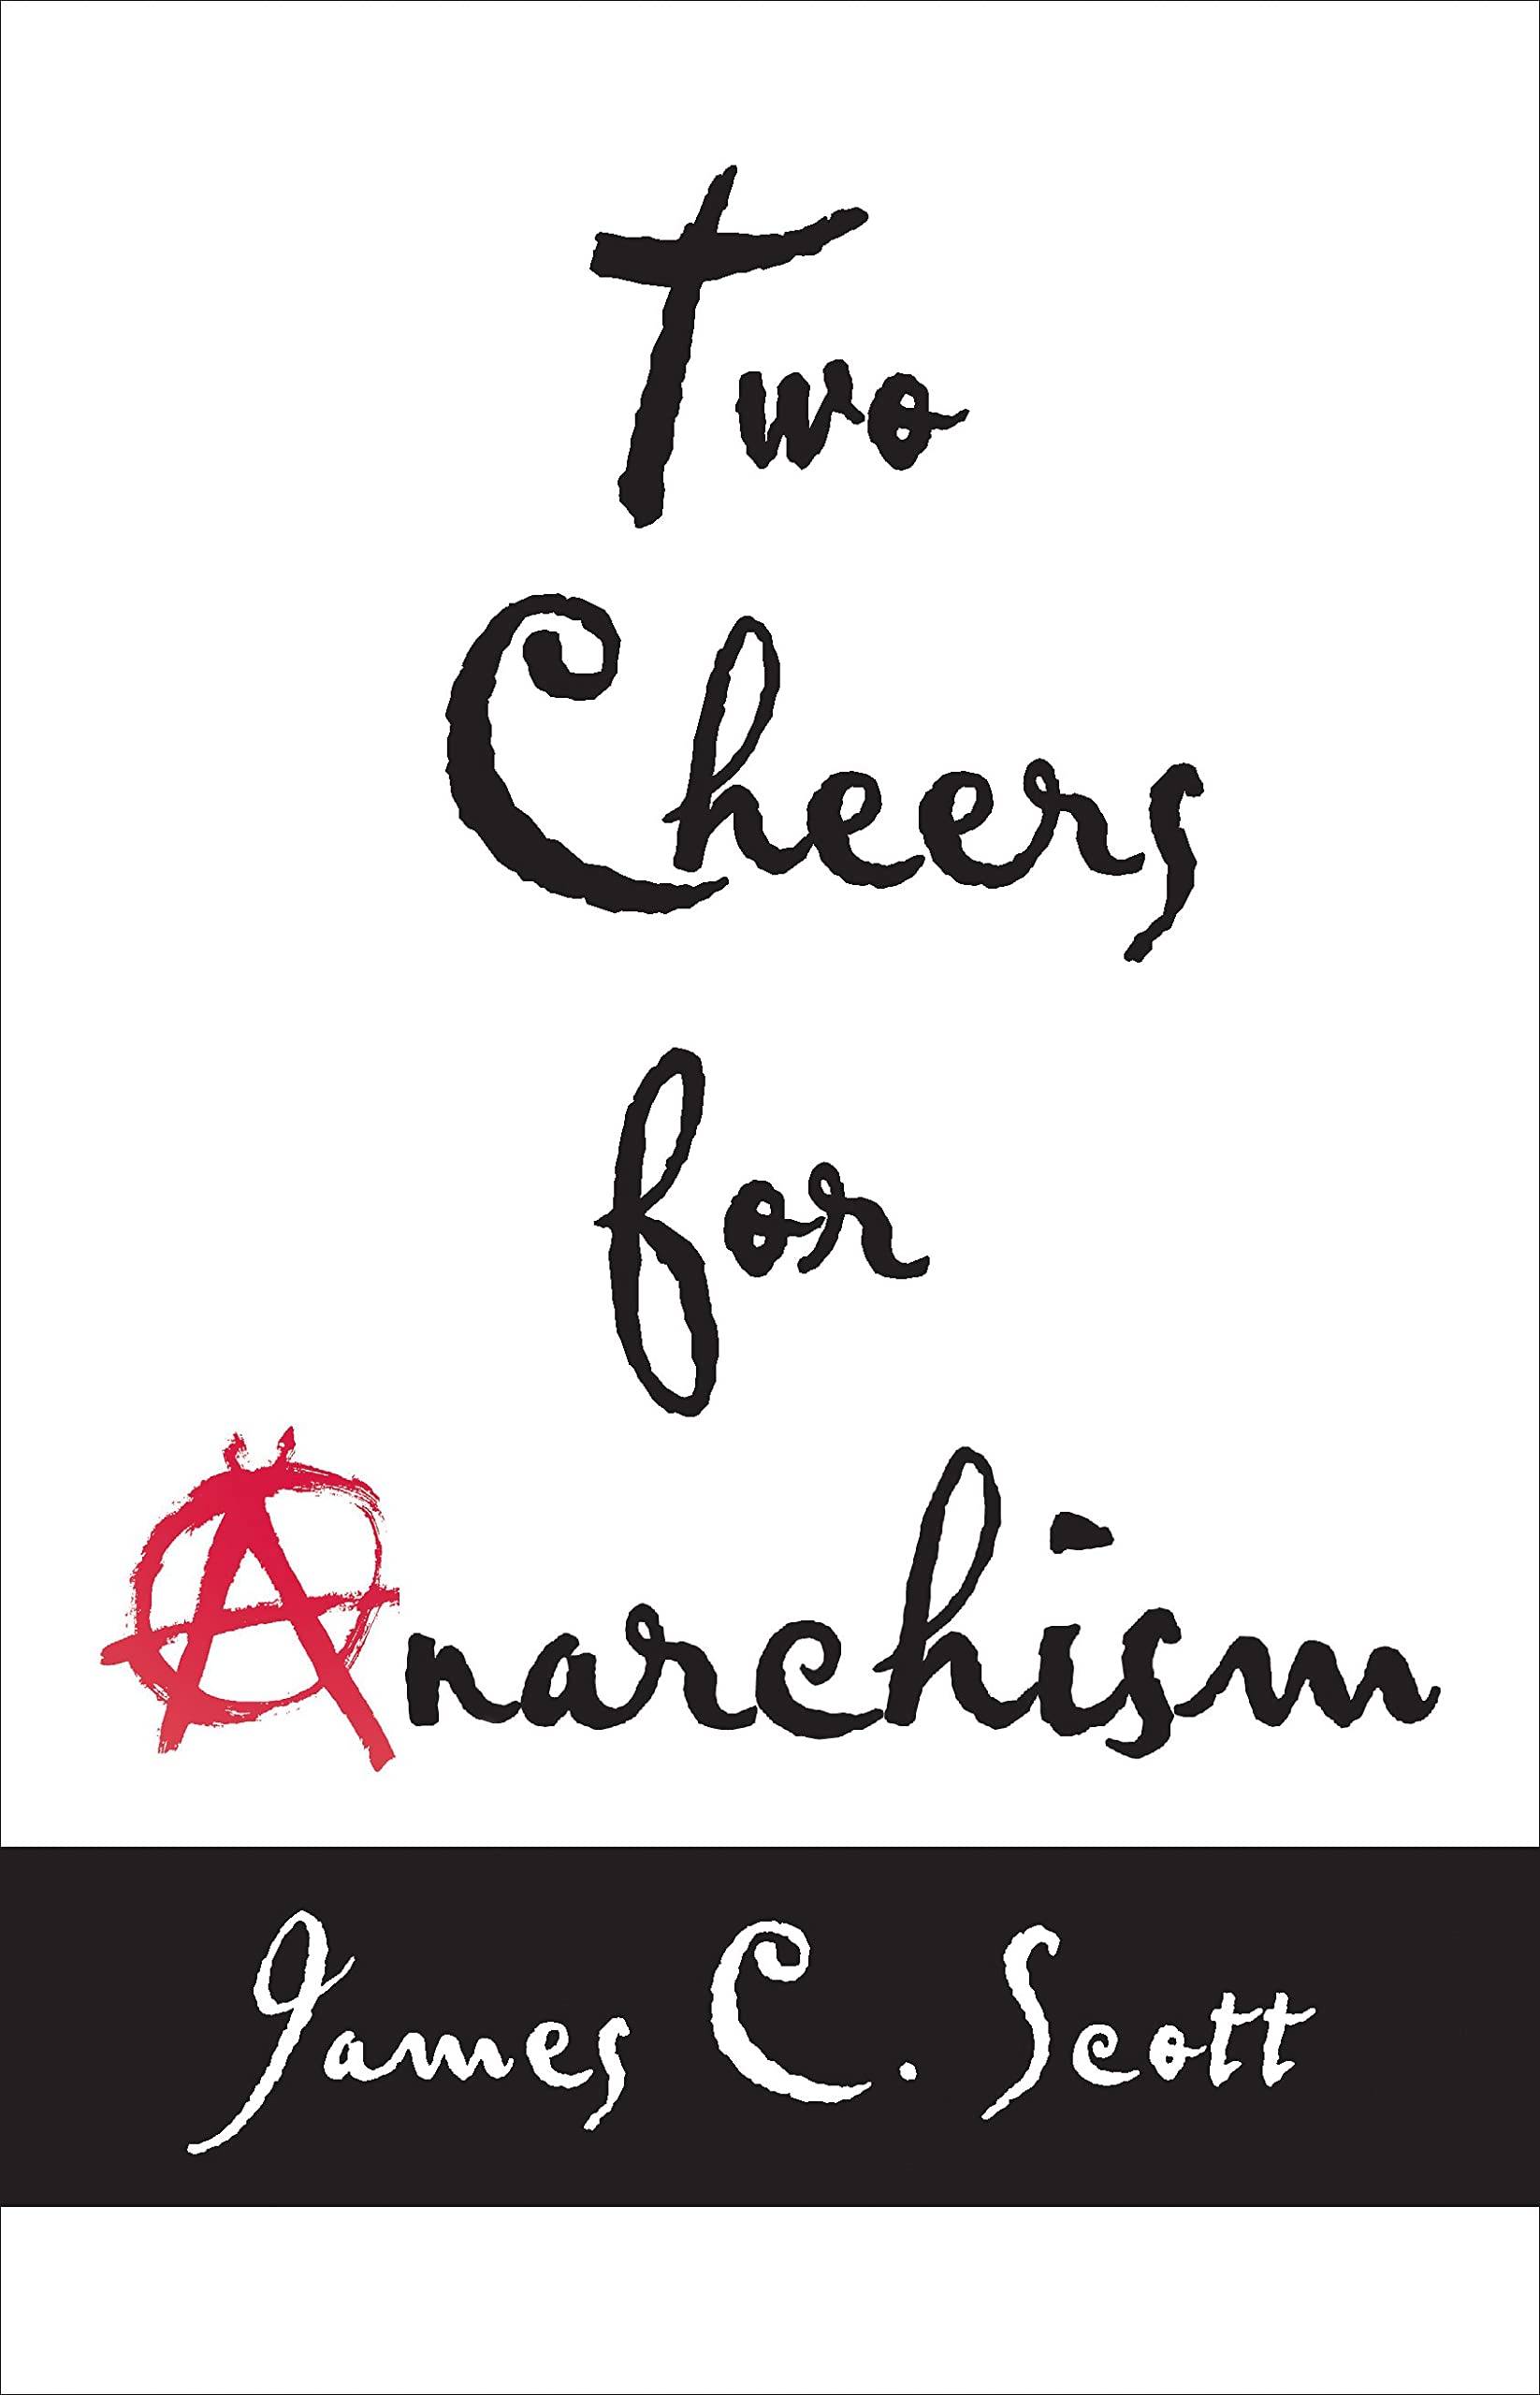 Book Cover Two Cheers for Anarchism: Six Easy Pieces on Autonomy, Dignity, and Meaningful Work and Play